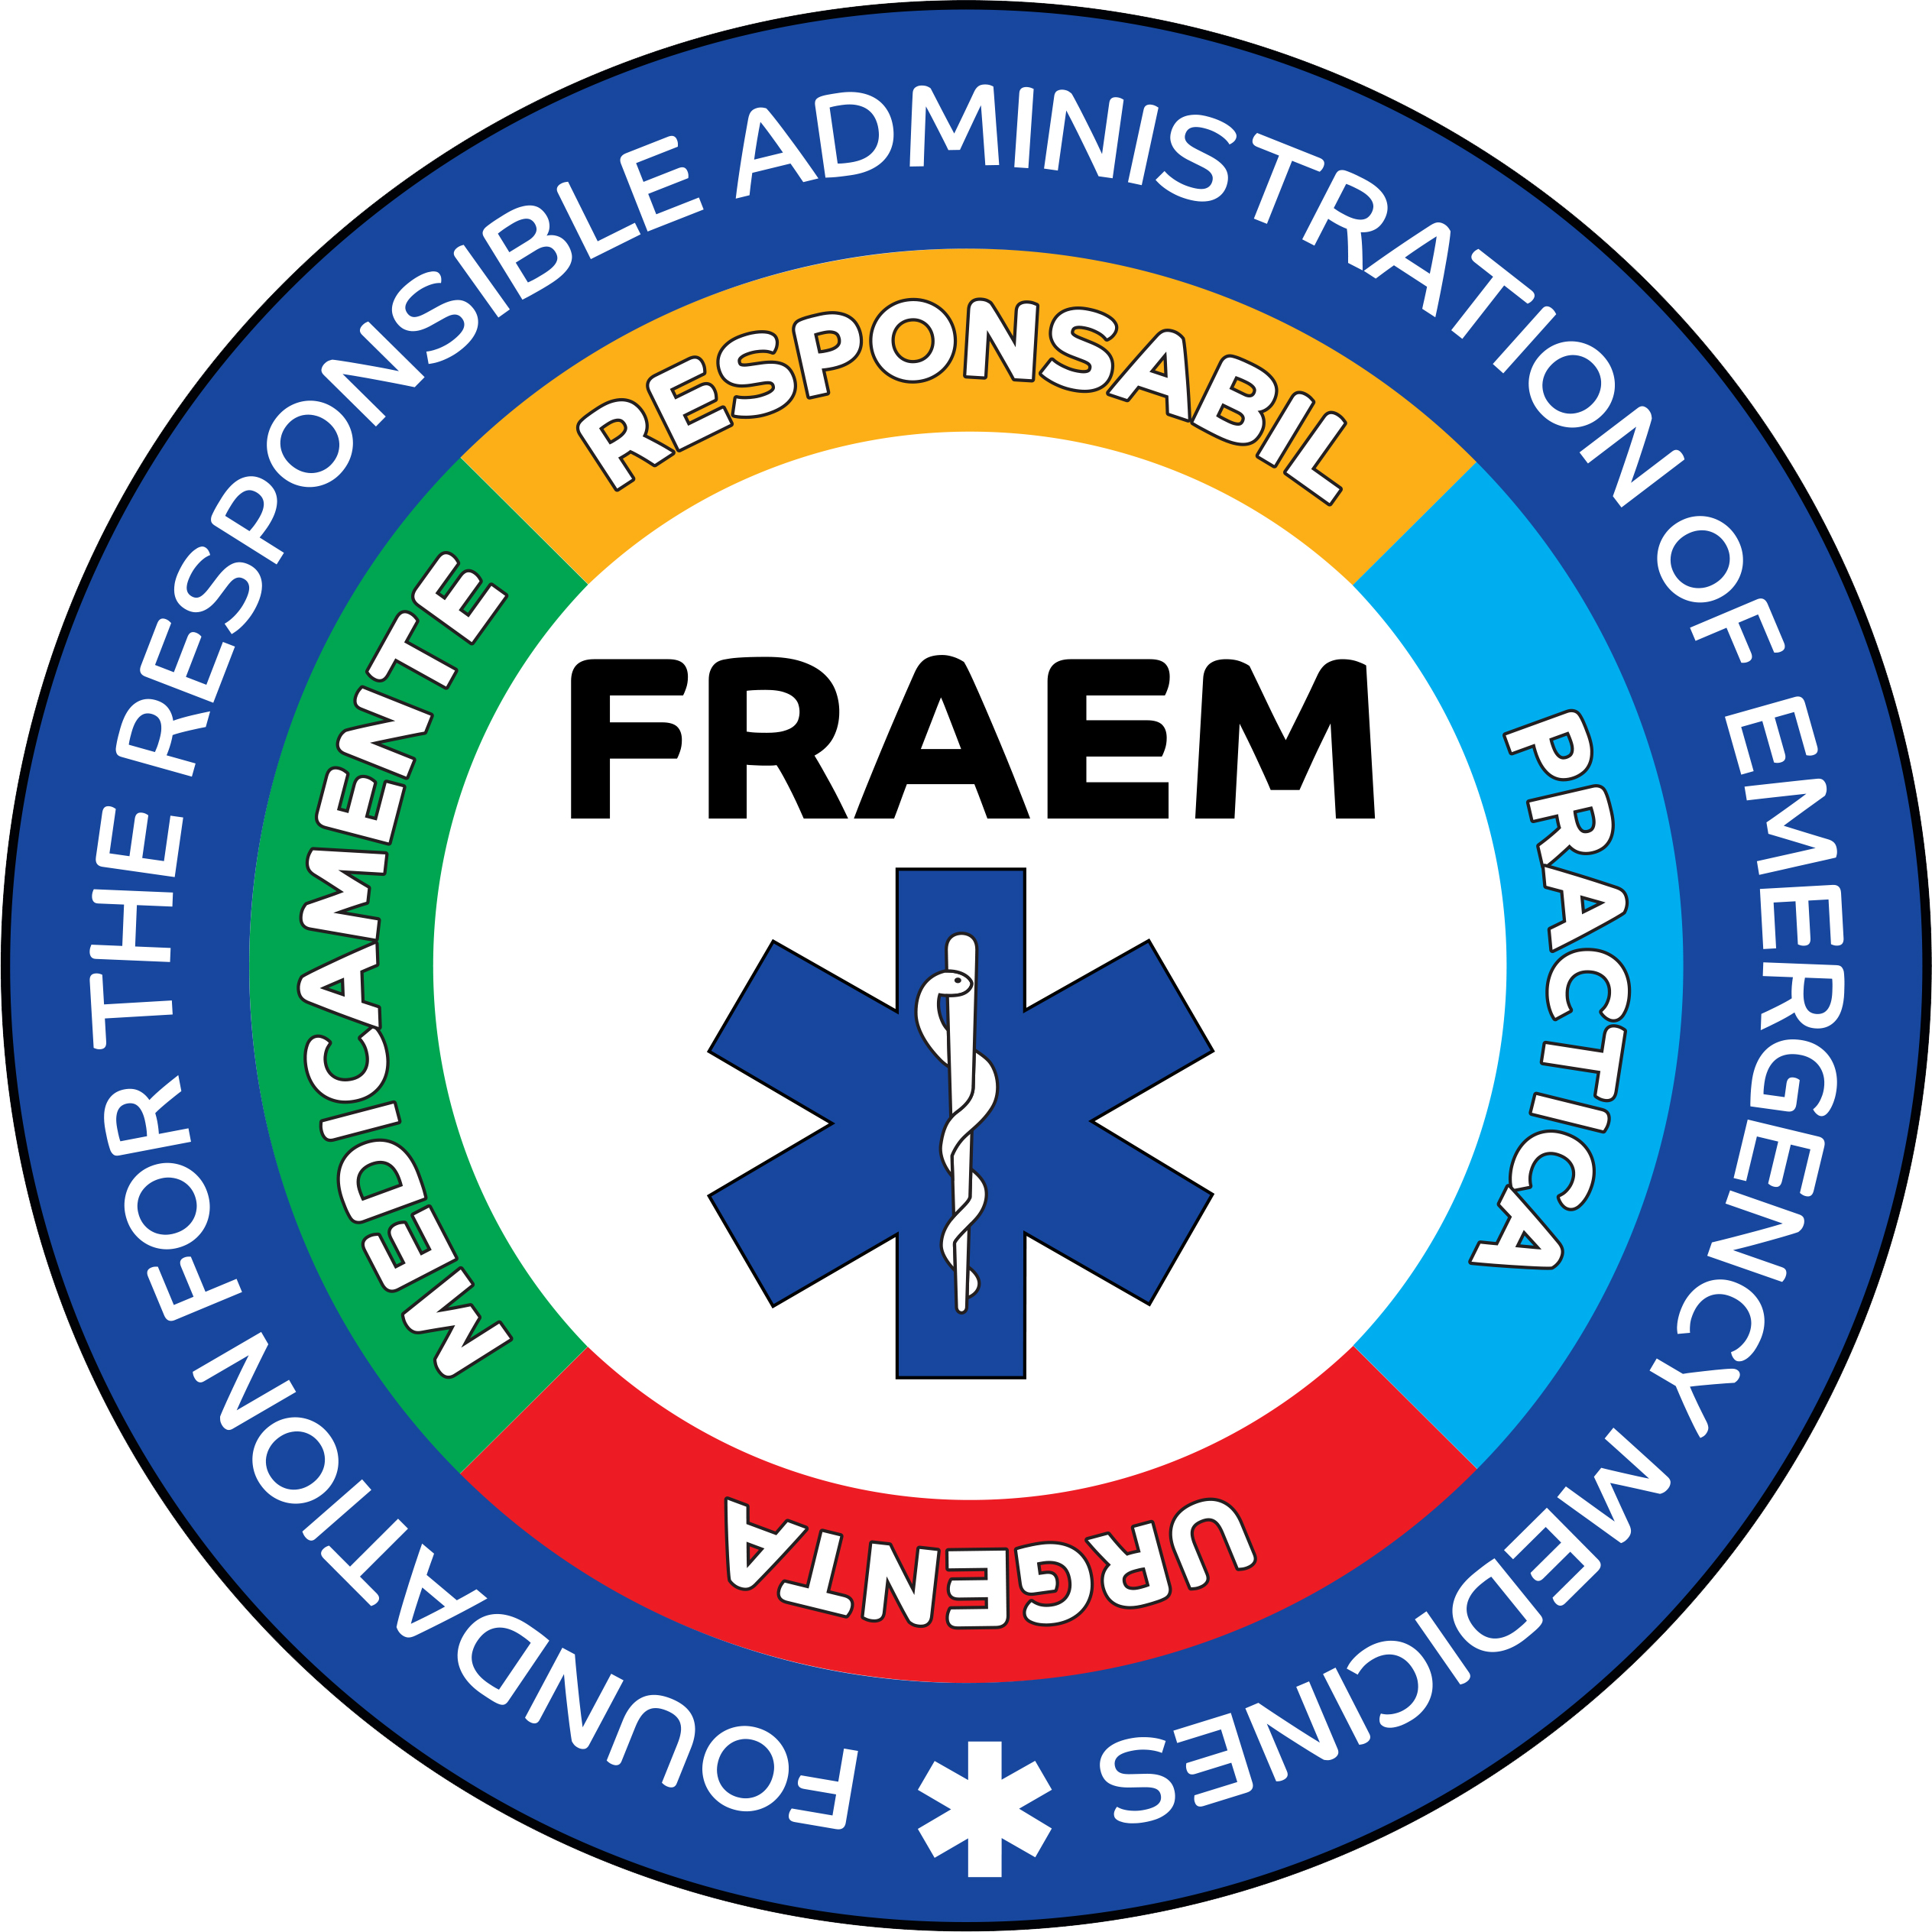 The Foundation for the Responsible Administration of Emergency Medicines